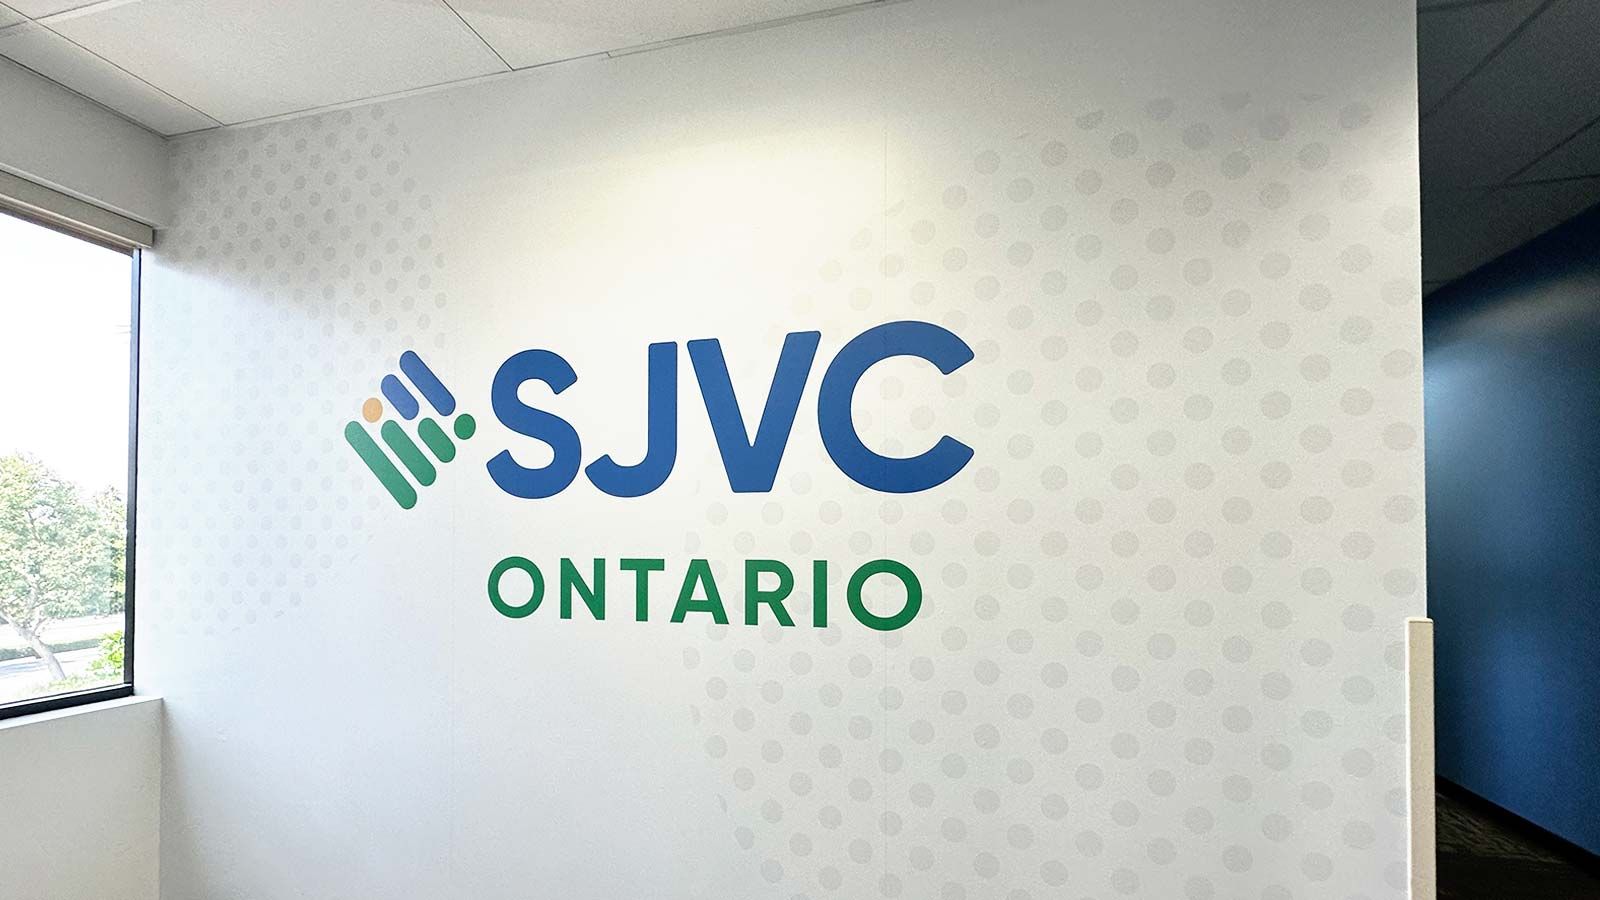 SJVC Ontario interior sign attached to the wall